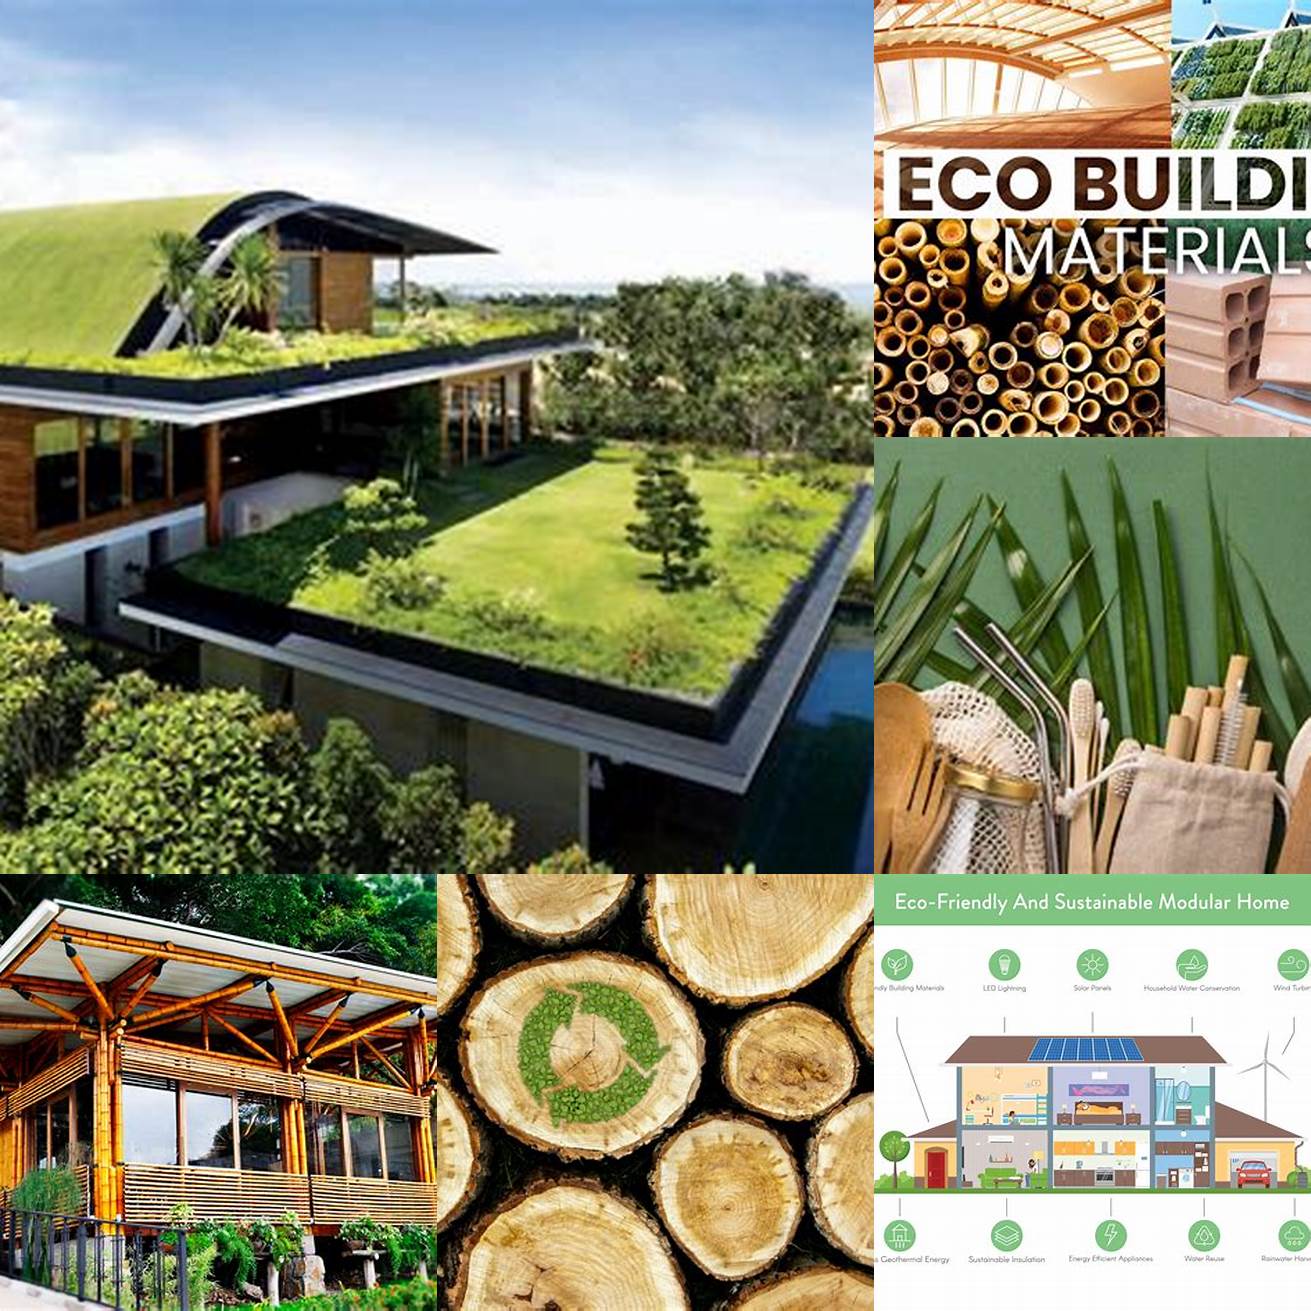 Using sustainable materials